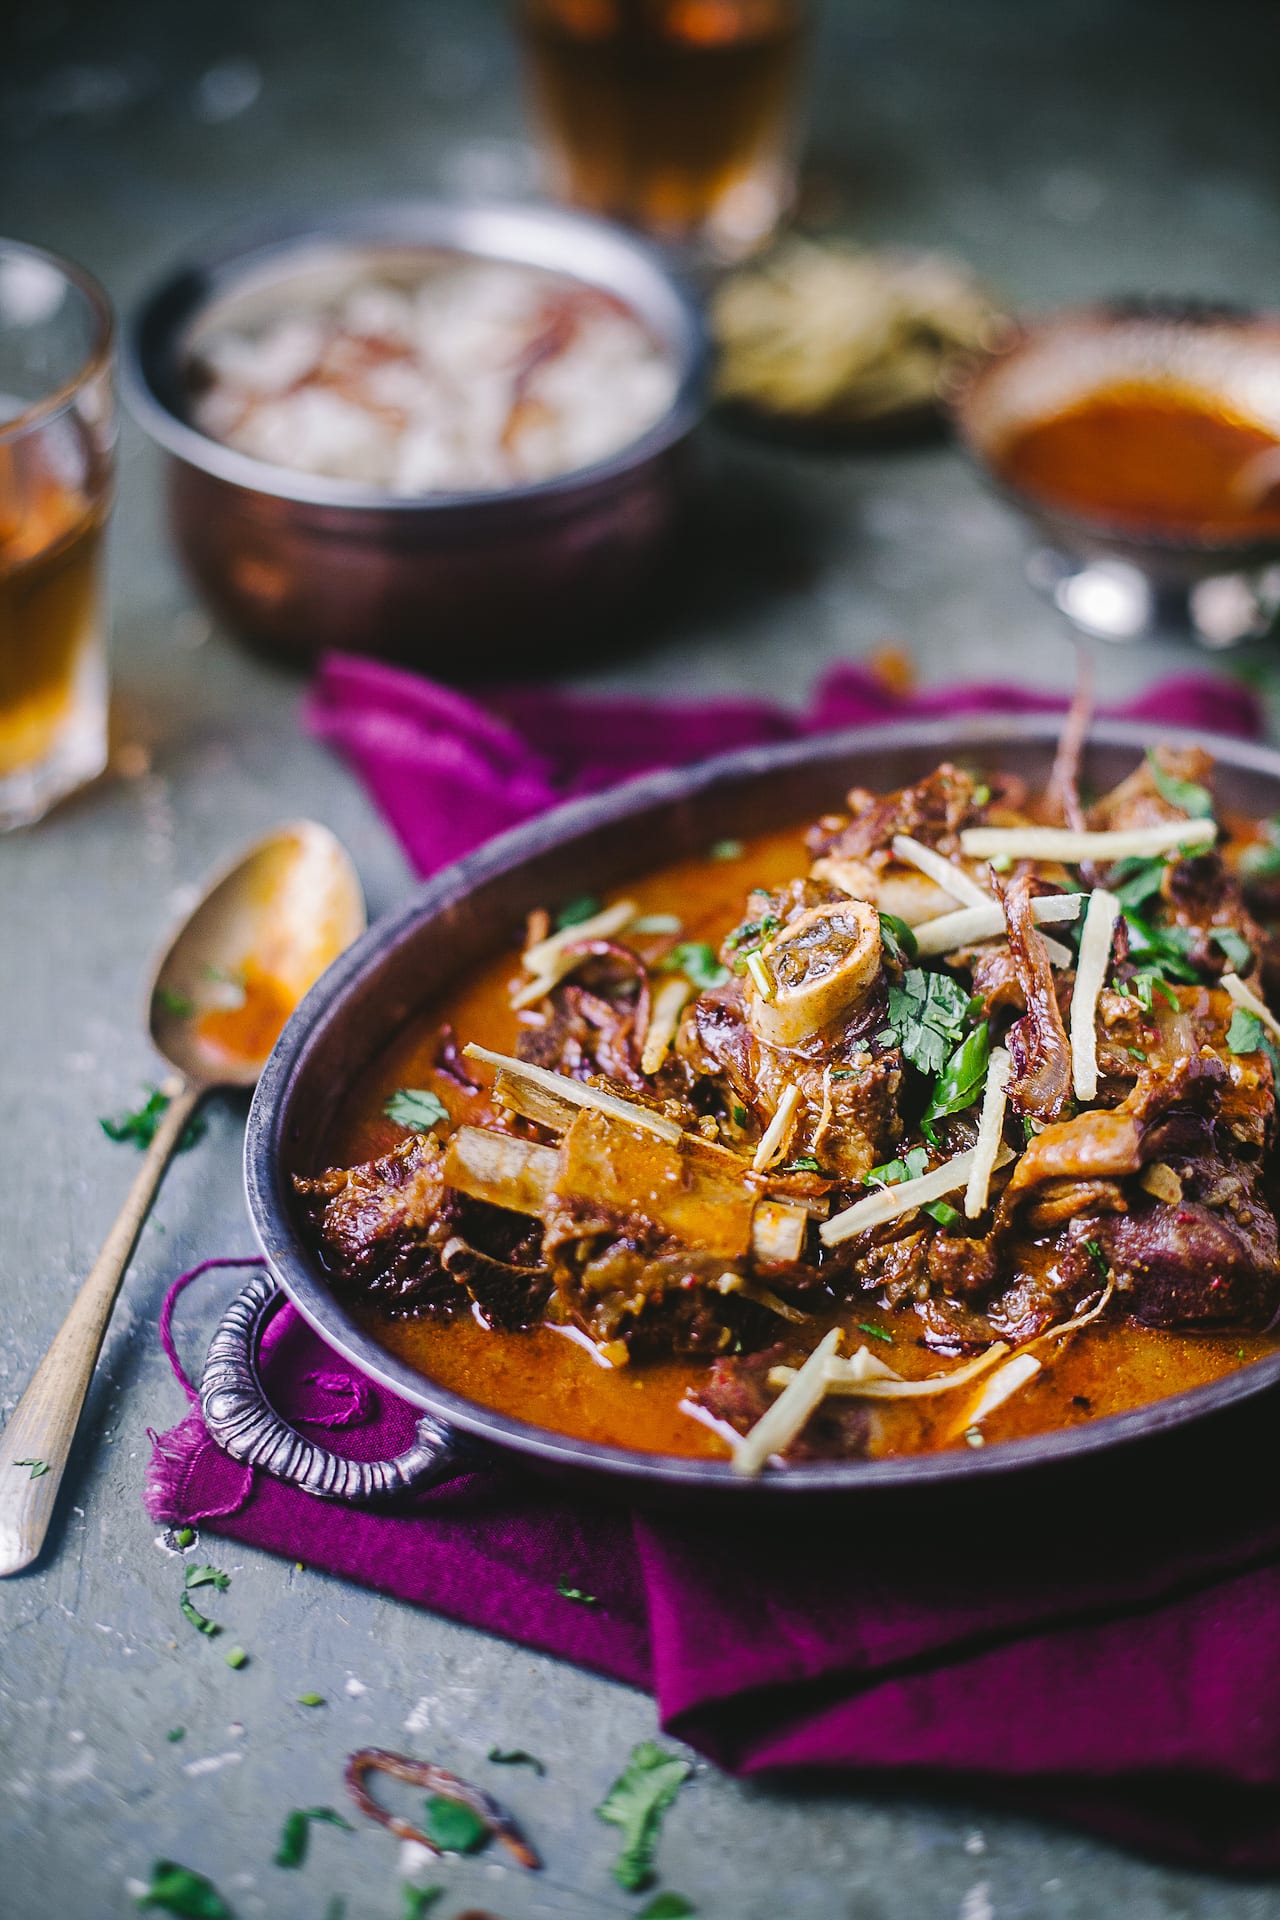 Mutton Nihari (Spiced Goat Stew) | Playful Cooking #indianfood #foodphotography #mutton #curry #meat